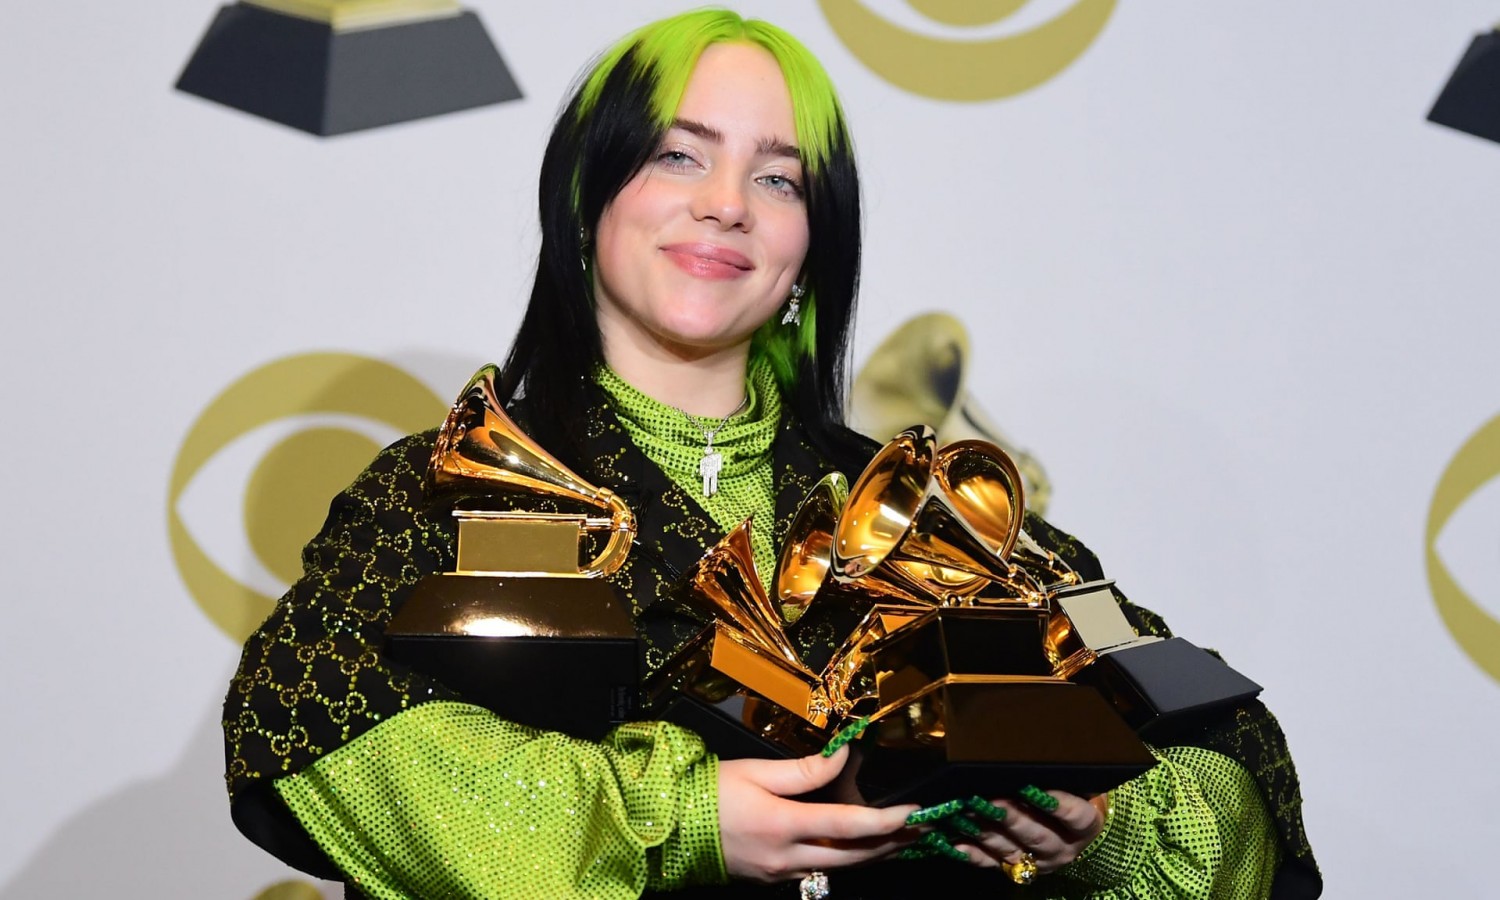 Billie Eilish won five awards, including best new artist, album of the year and song of the year at the 62nd annual Grammy awards. Photograph: Frederic J Brown/AFP via Getty Images